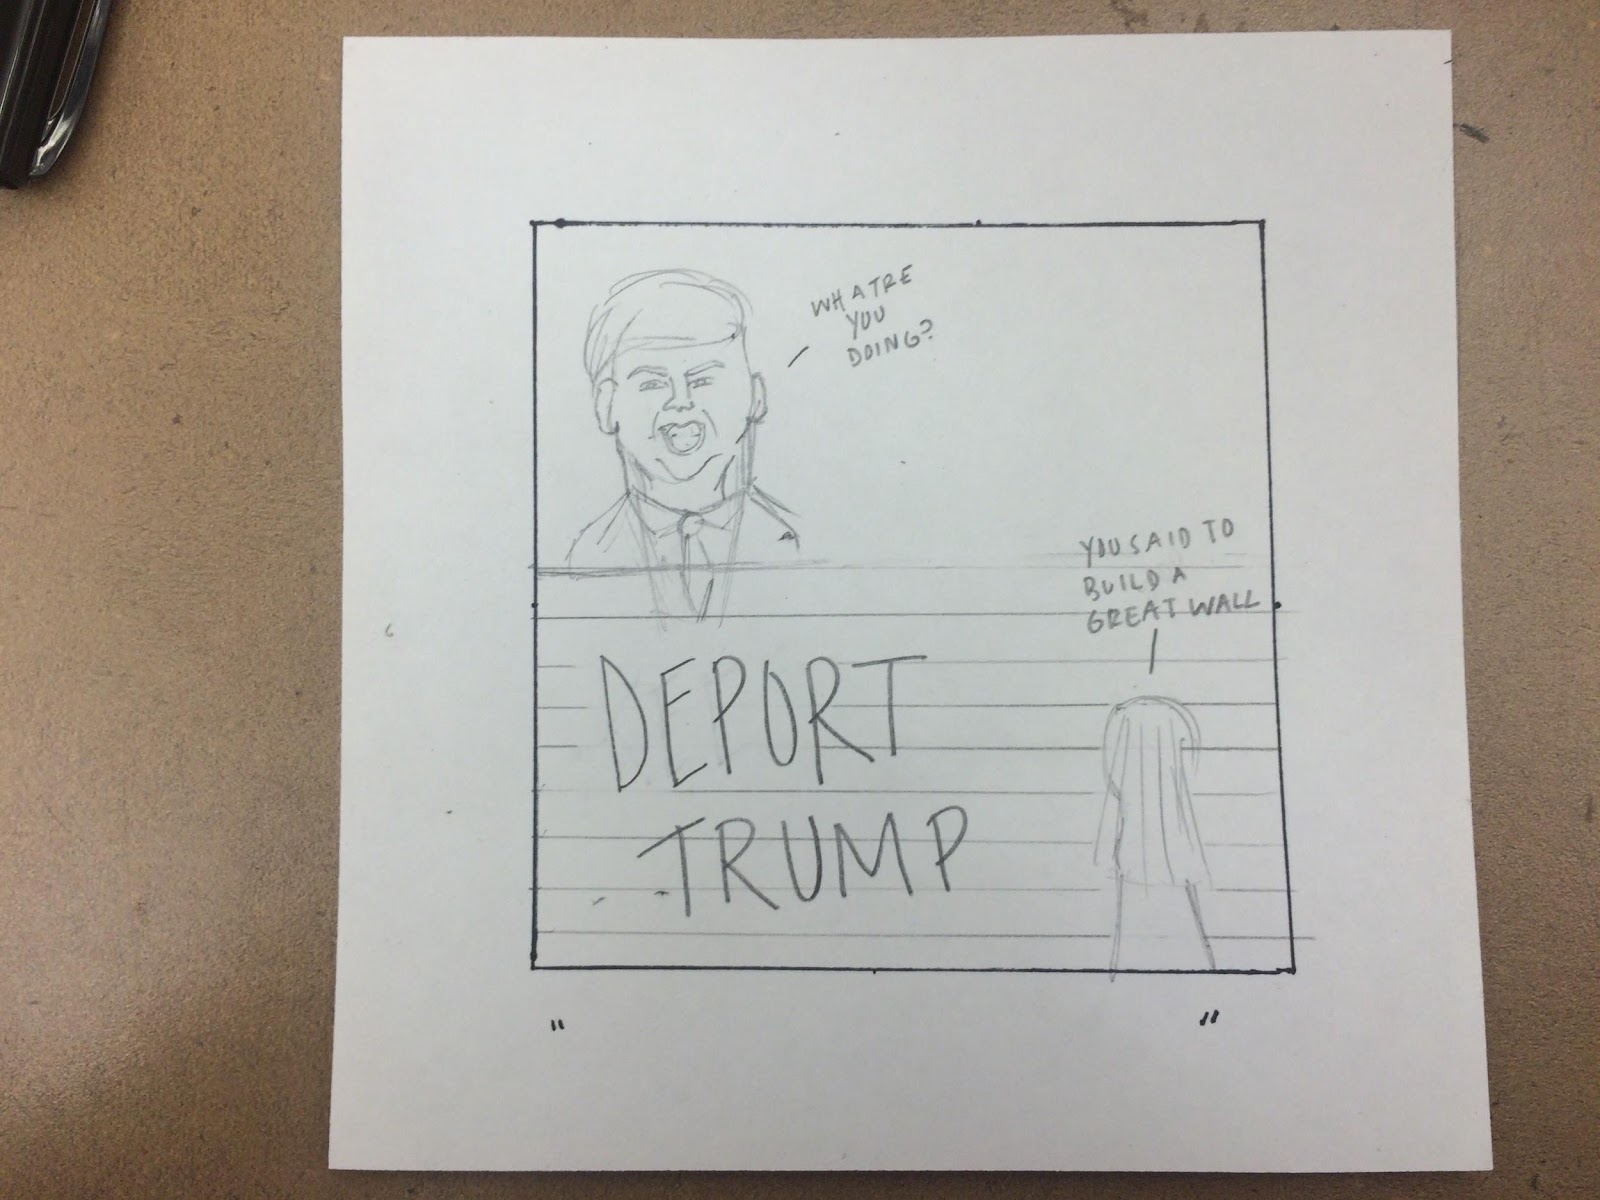 A series of images showing the steps of a political cartoon being drawn. The cartoon itself is about Donald Trump's border wall policies.